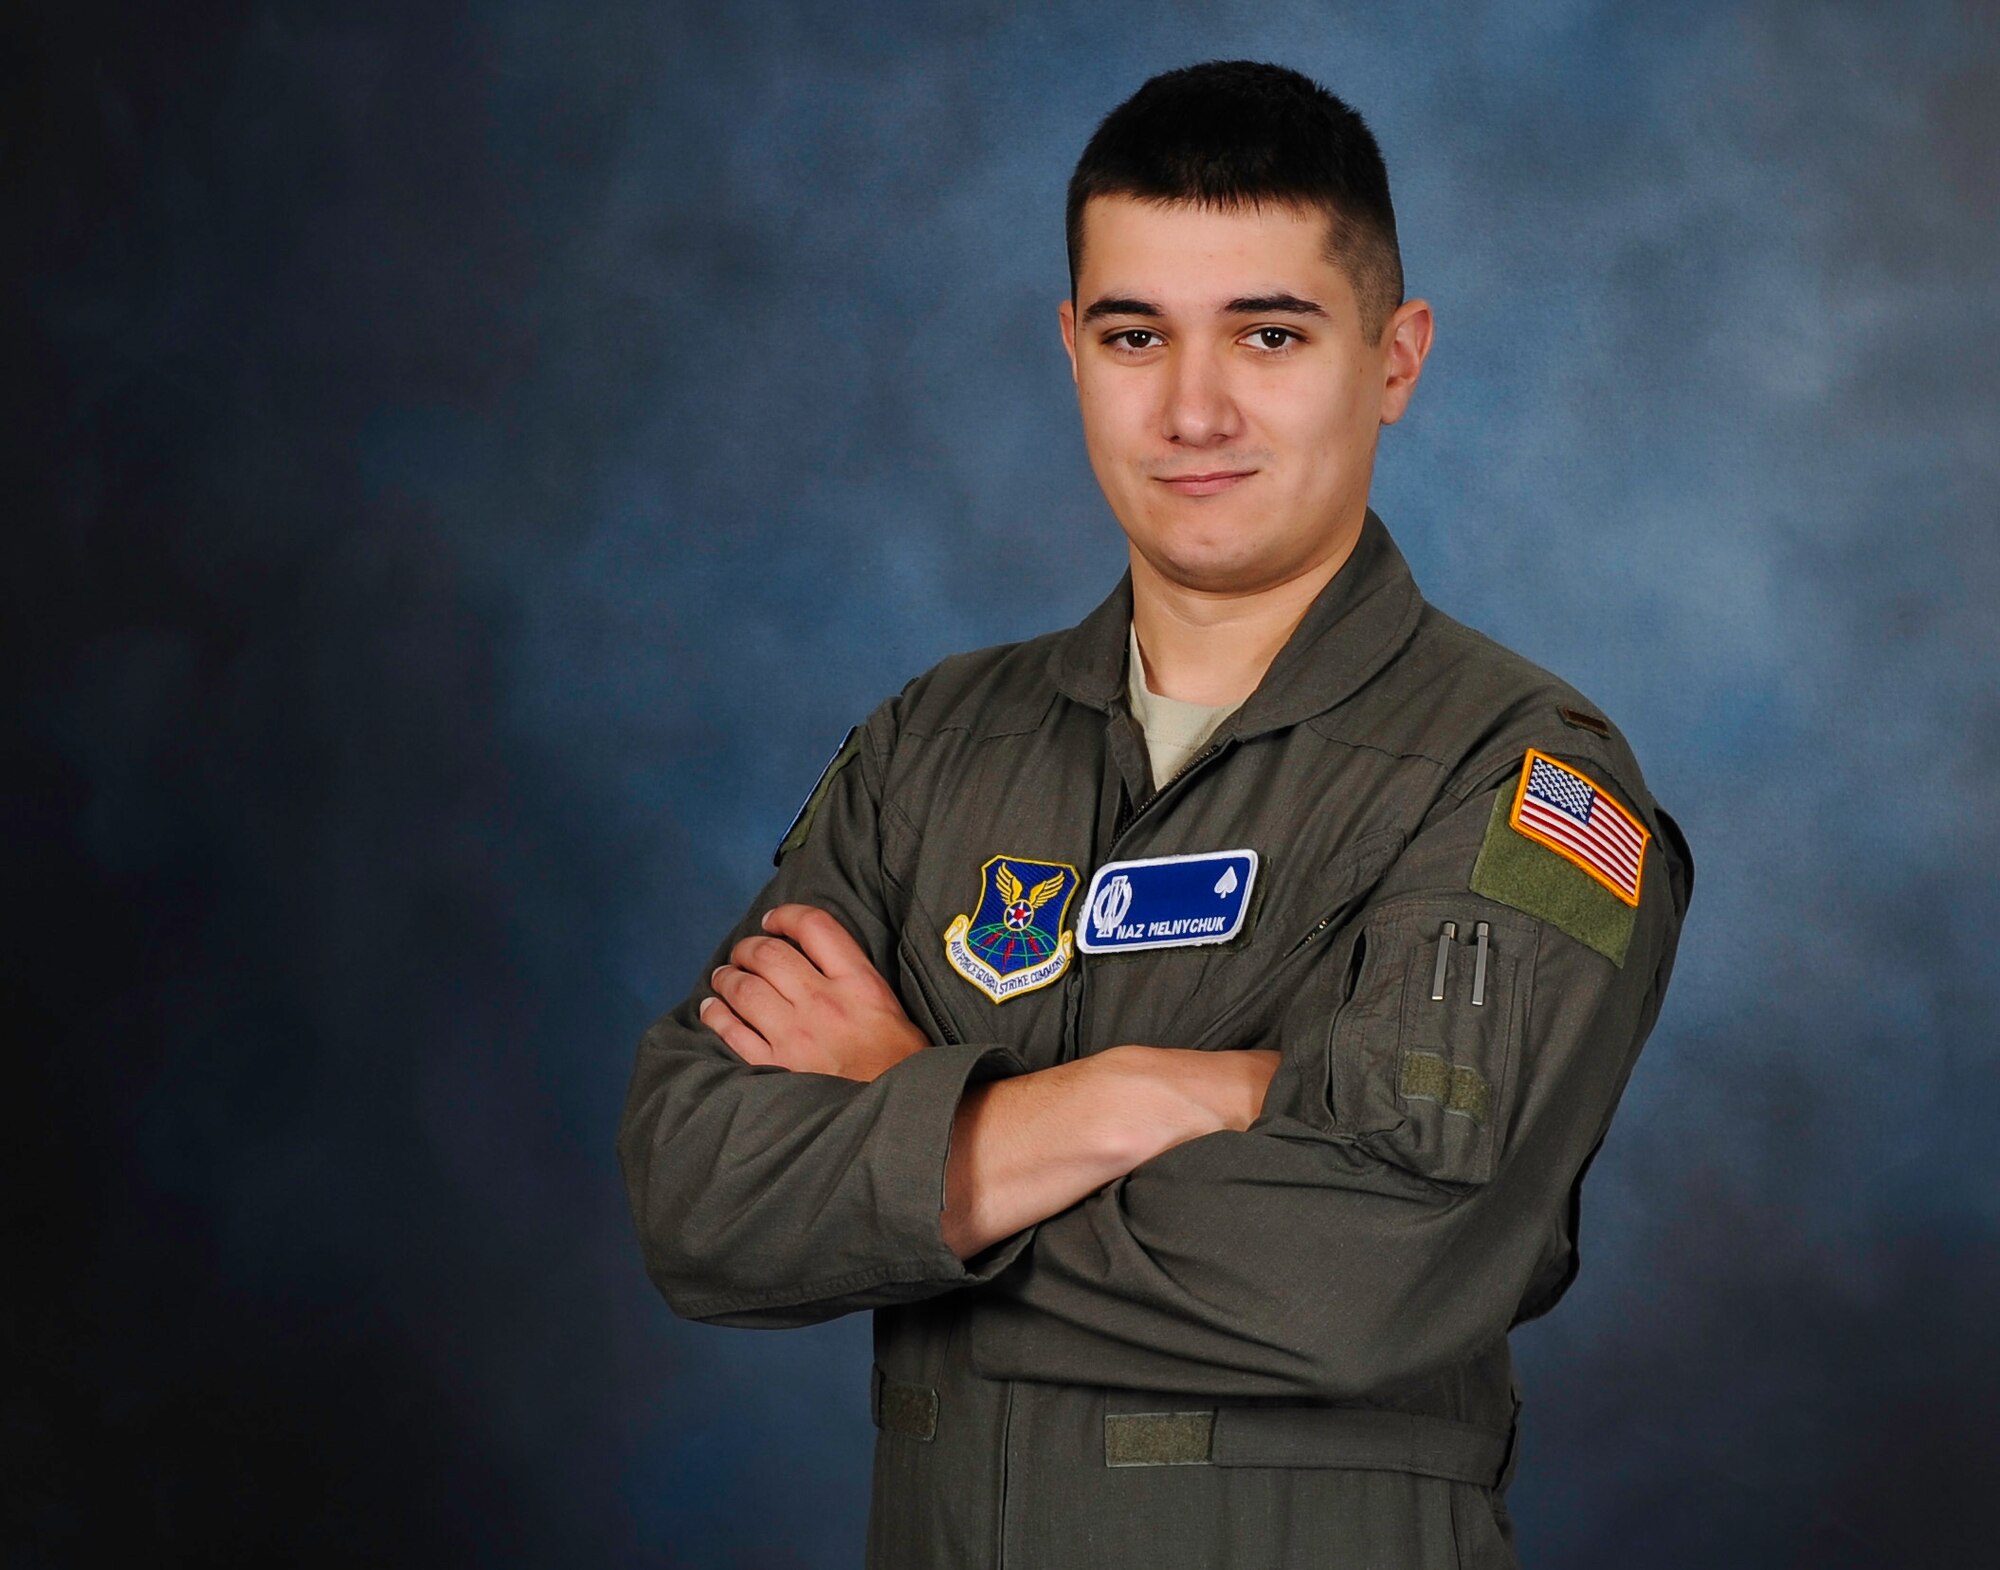 2nd Lt. Nazariy Melnychuk, 10th Missile Squadron Intercontinental Ballistic Missile combat crew member, poses for a portrait August 13, 2019, at Malmstrom Air Force Base Mont. Melnychuk is part of the Air Force’s Language Enabled Airman Program.